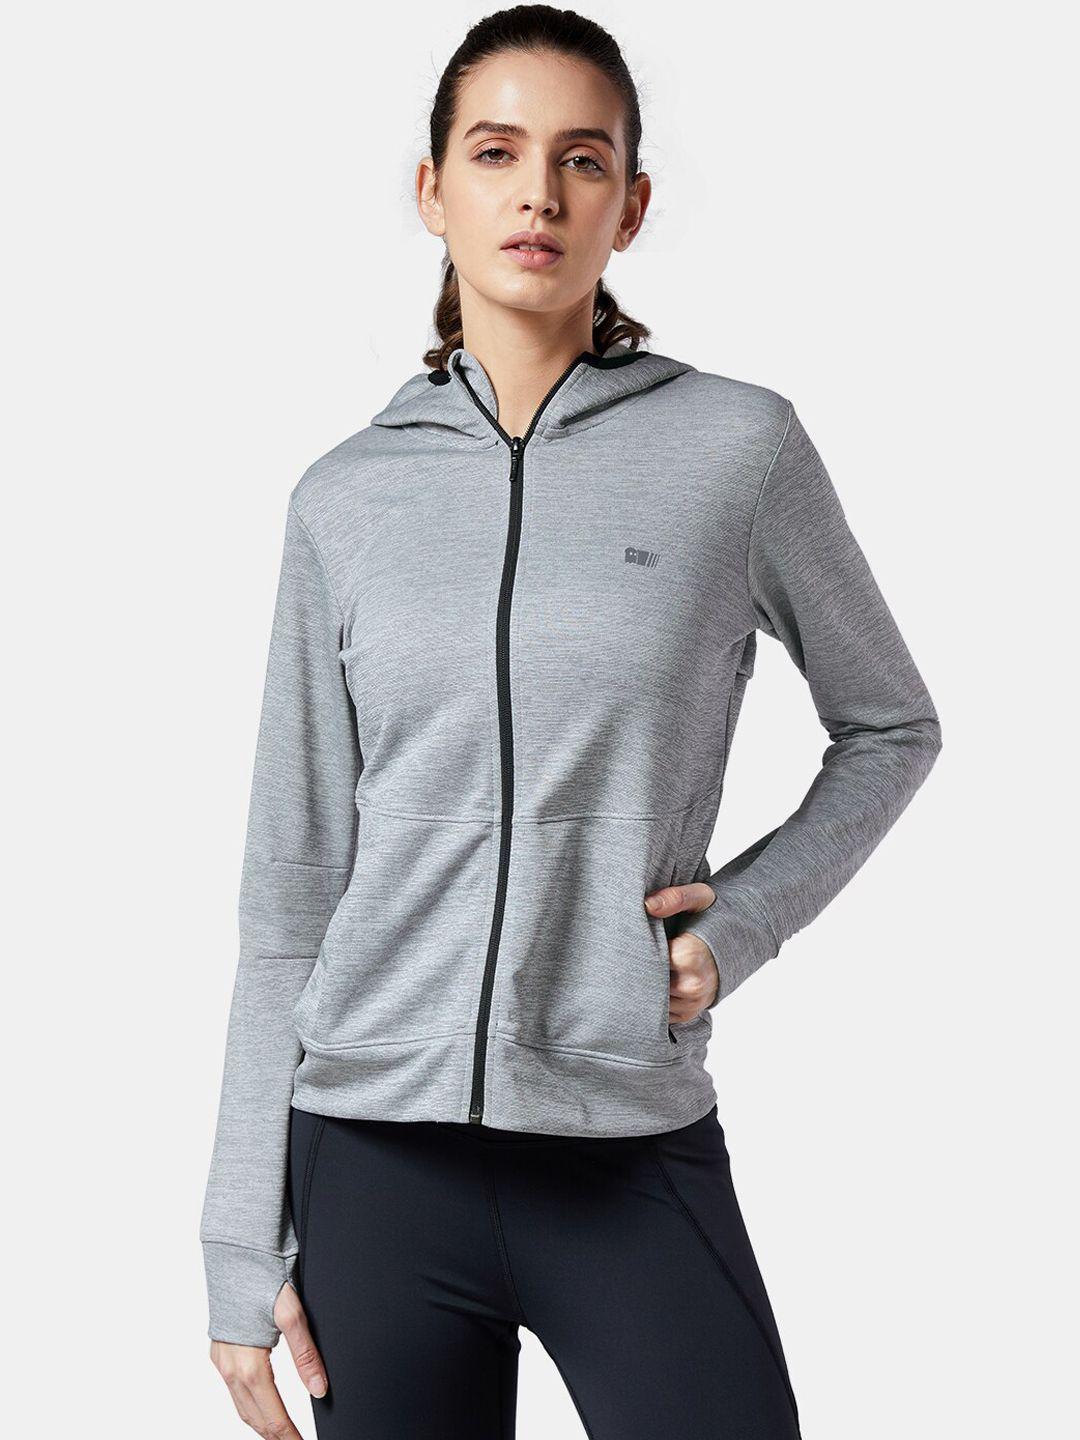 the souled store women grey reflective strip open front jacket